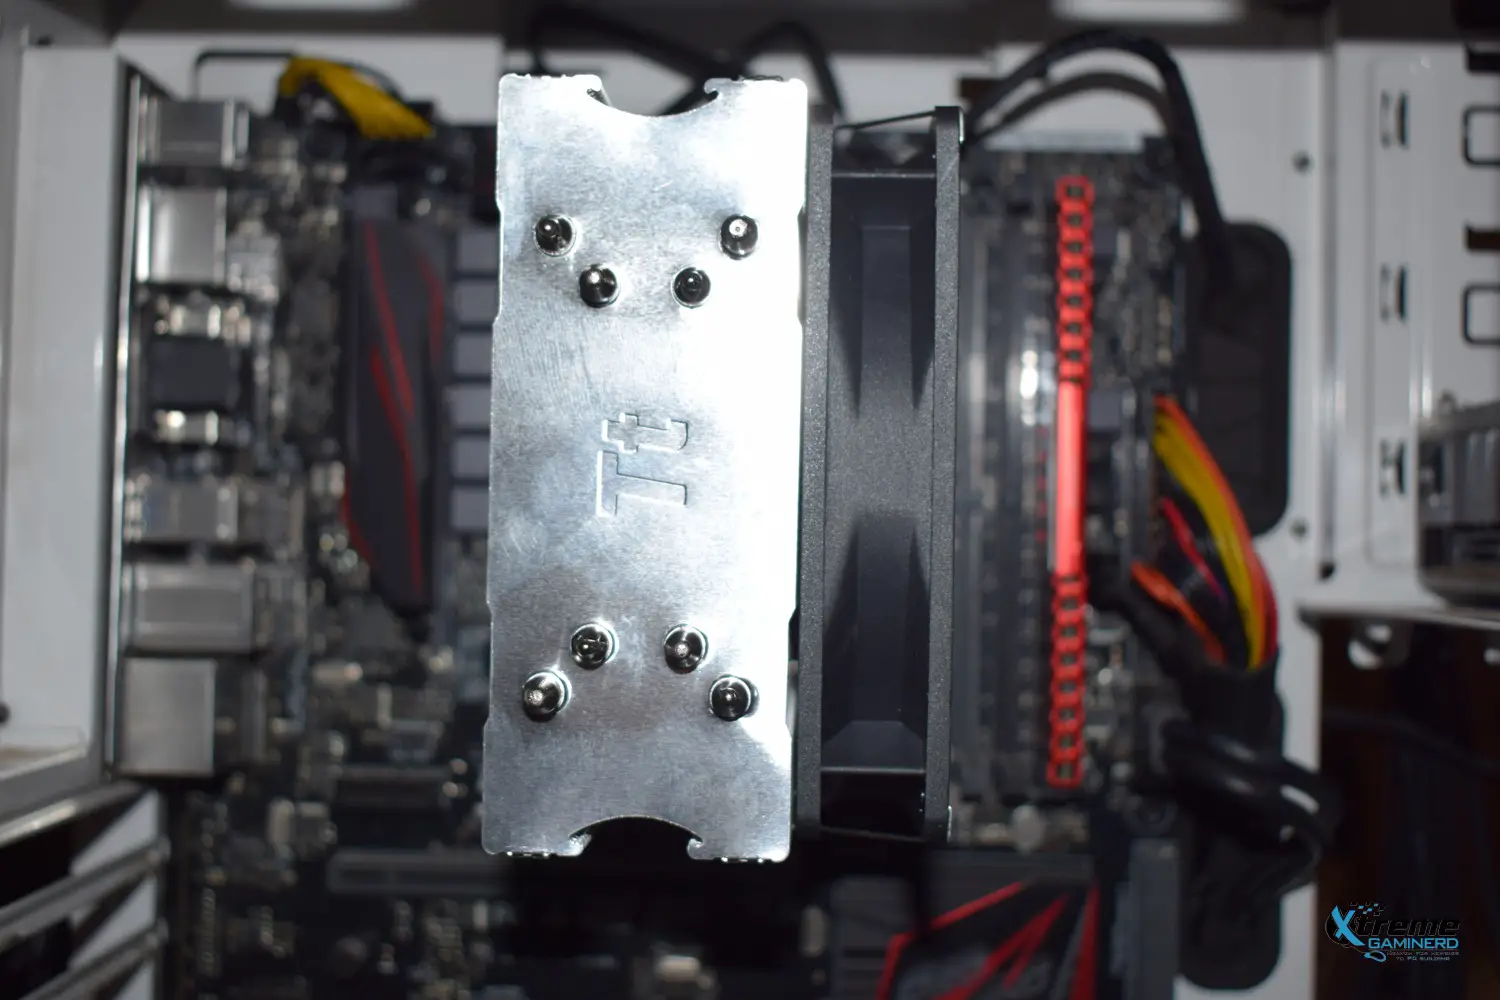 Thermaltake Contac Silent 12 installation complete